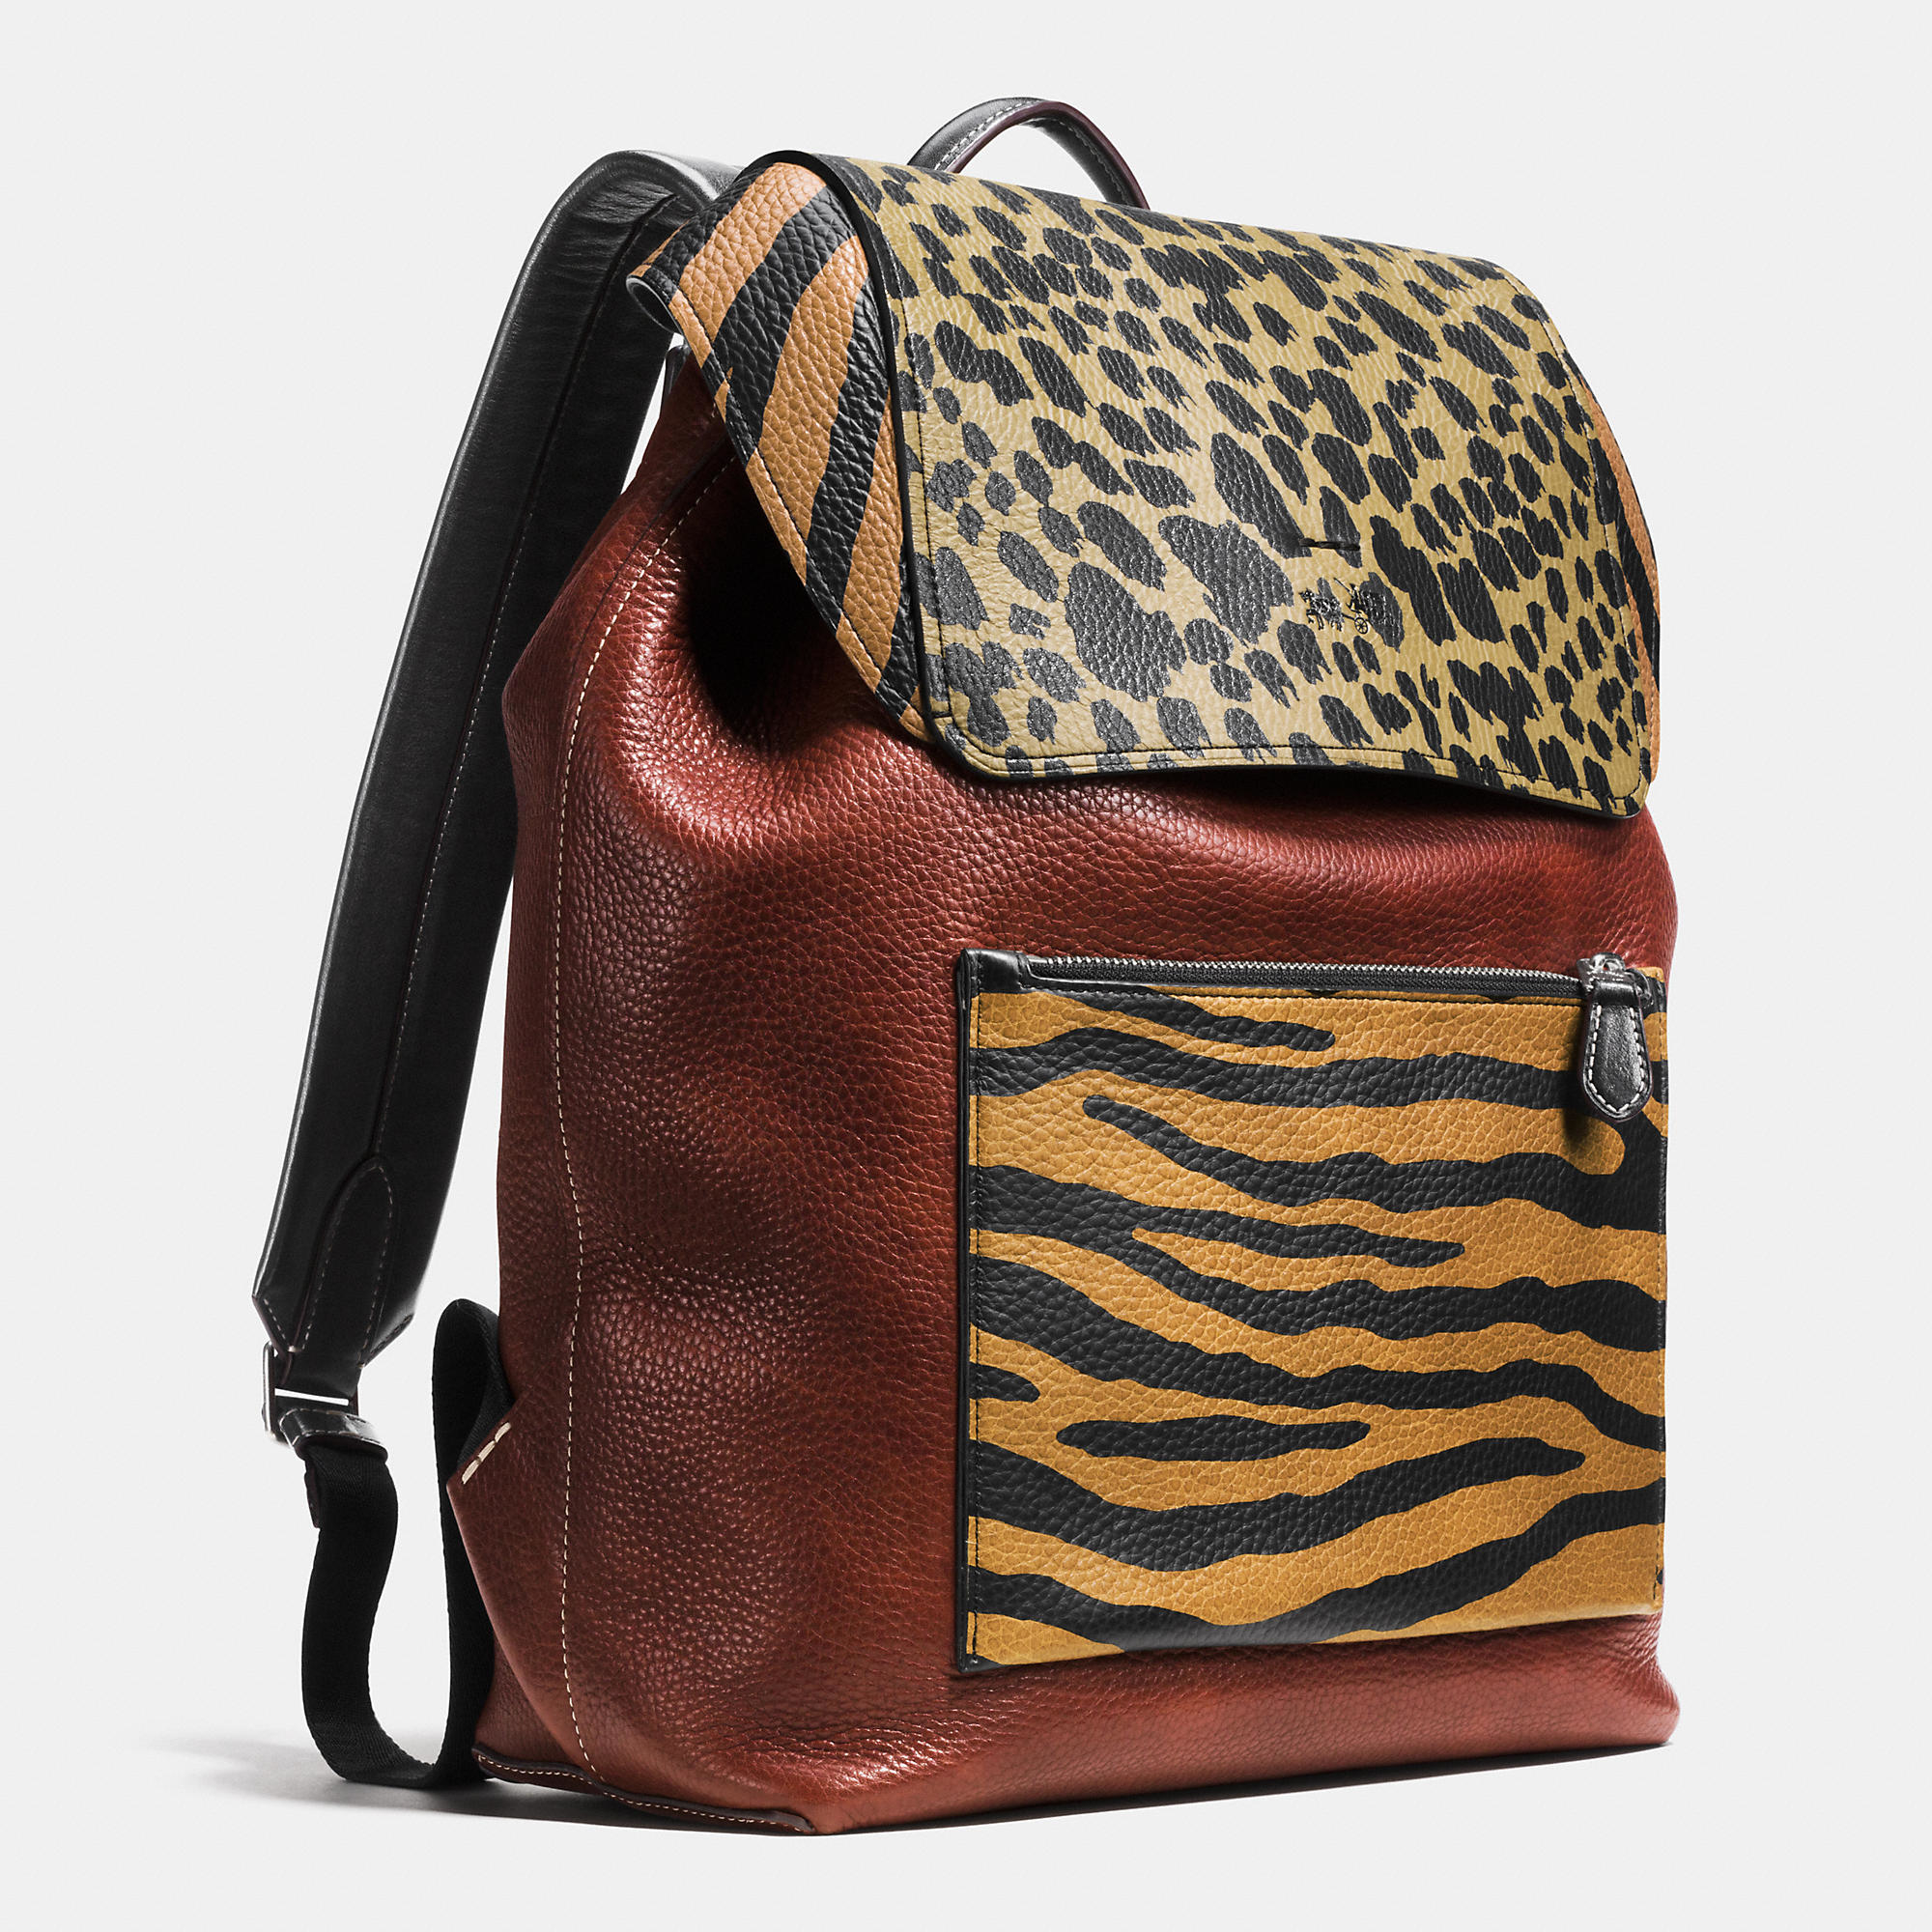 COACH Small Backpack In Printed Pebble Leather in Orange Tiger (Red) for Men - Lyst